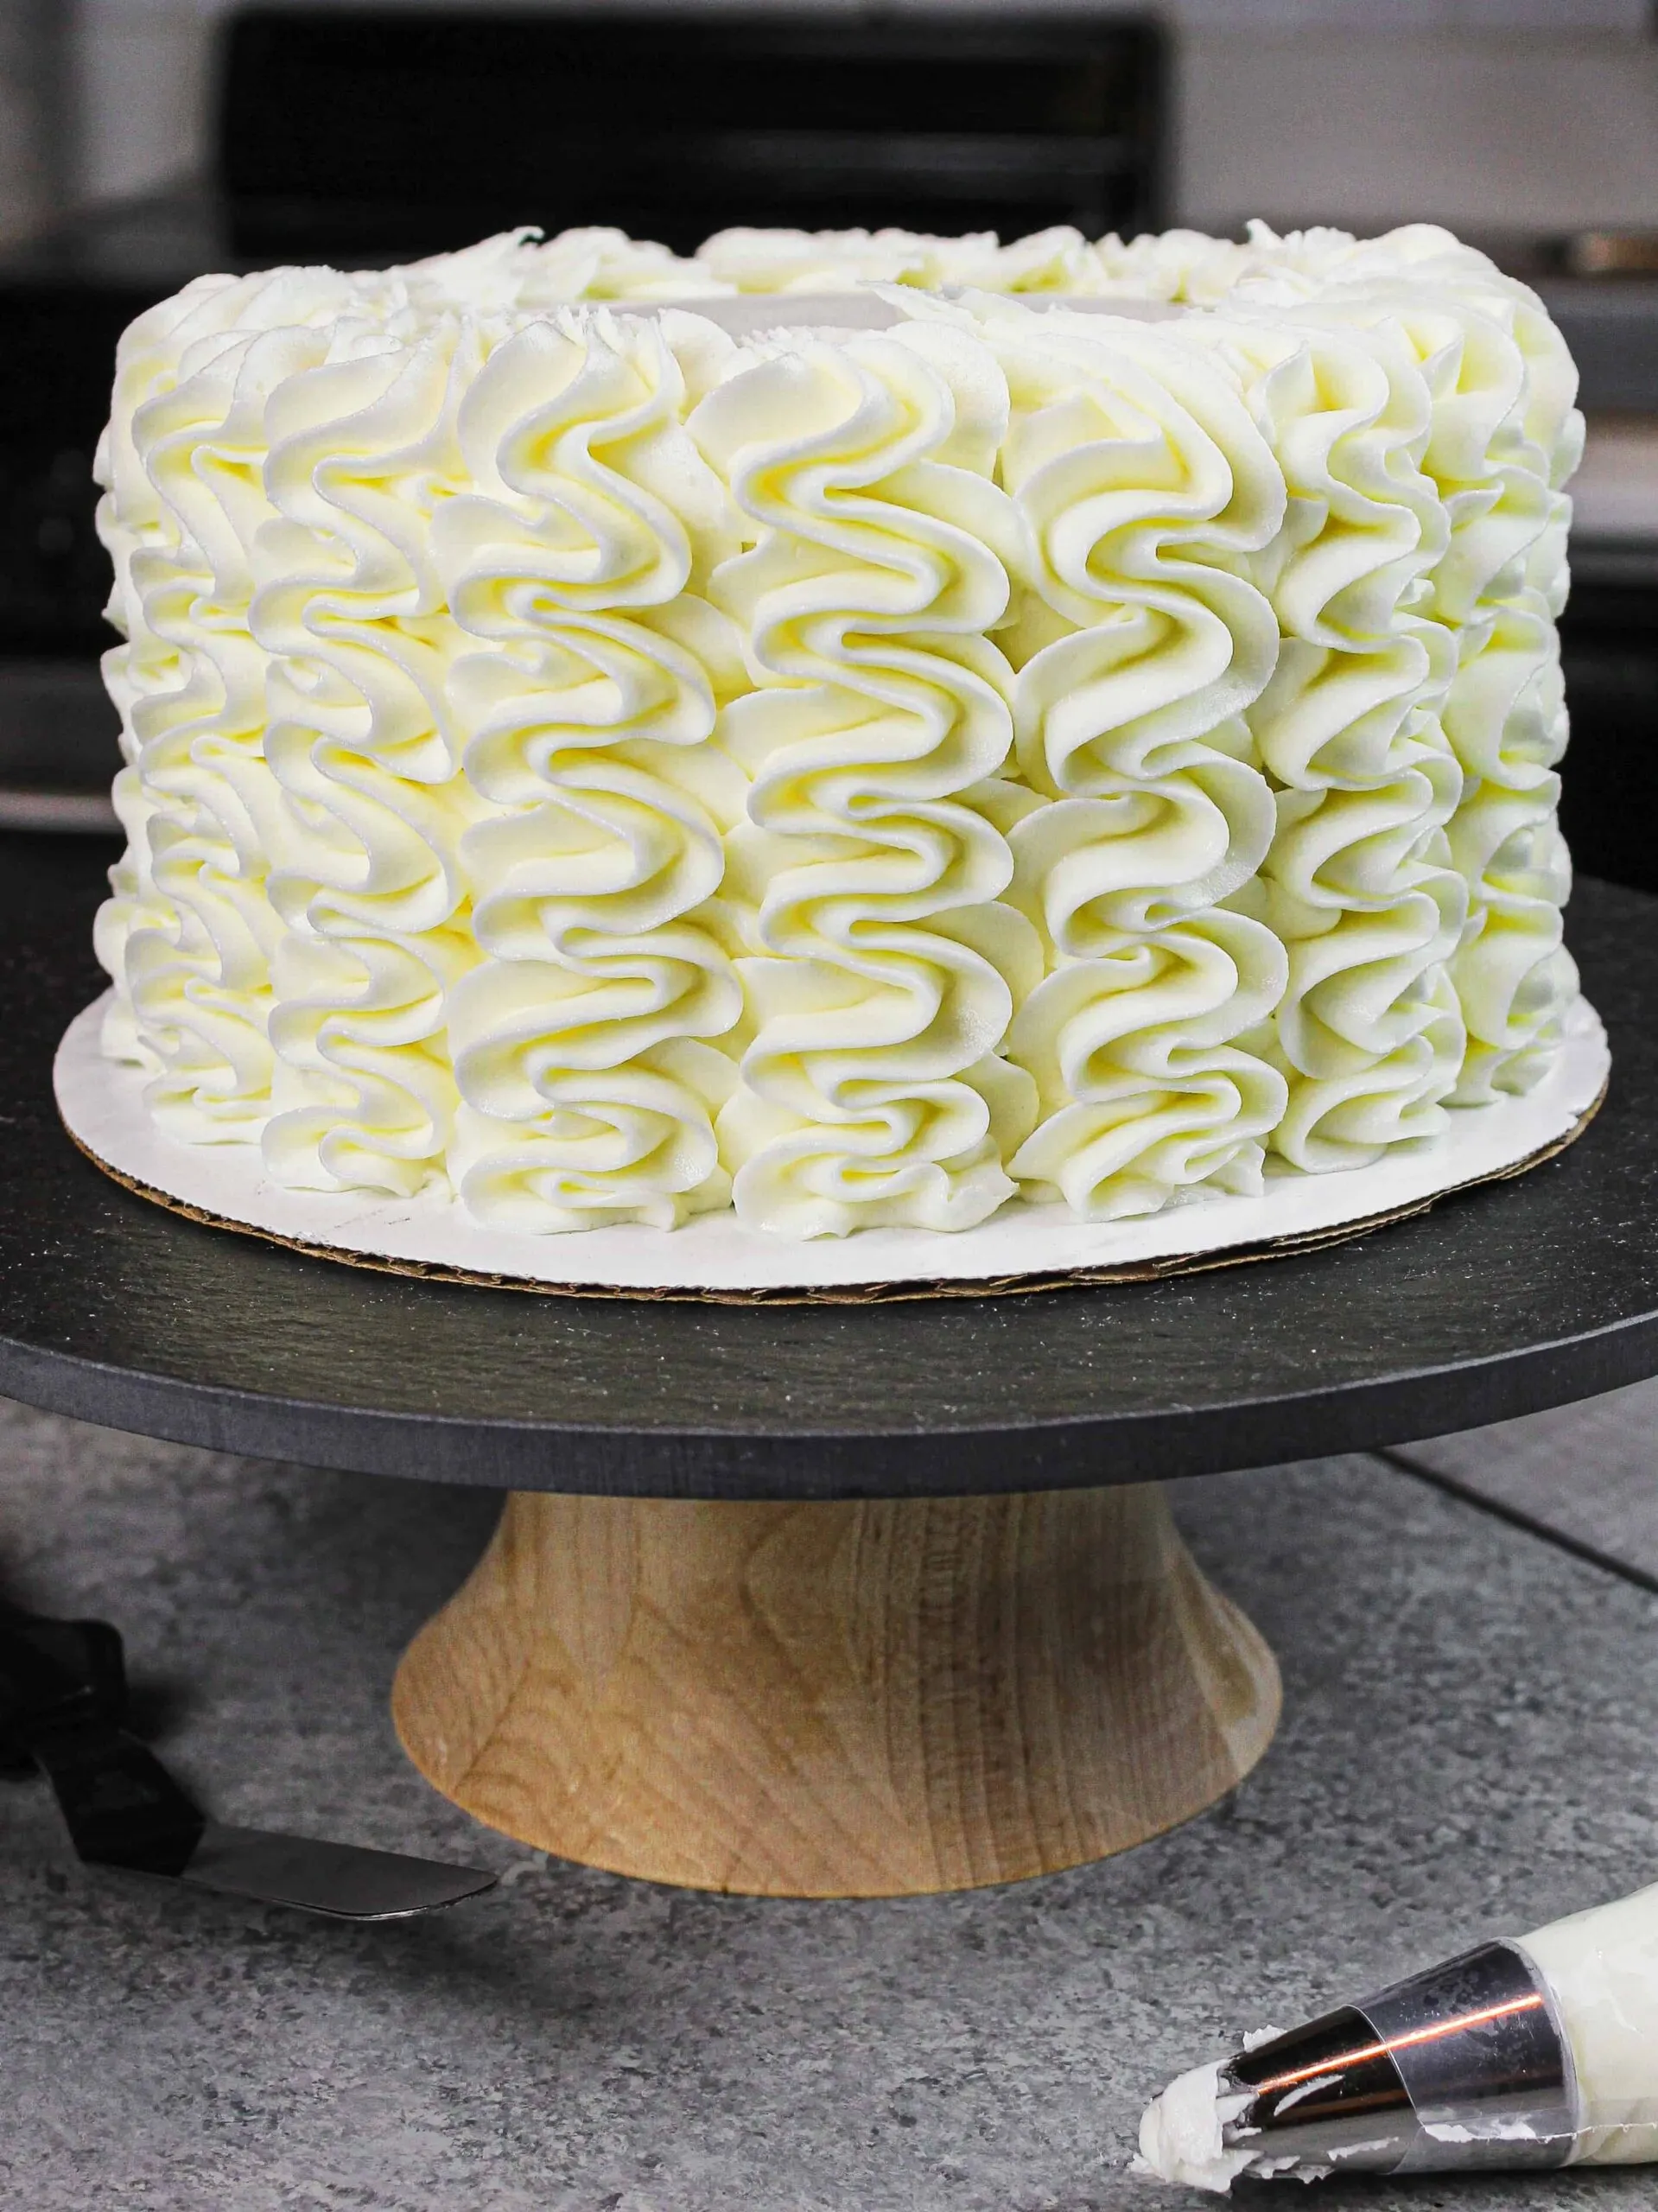 image of easy gluten free cake decorated with gluten free frosting squiggles
